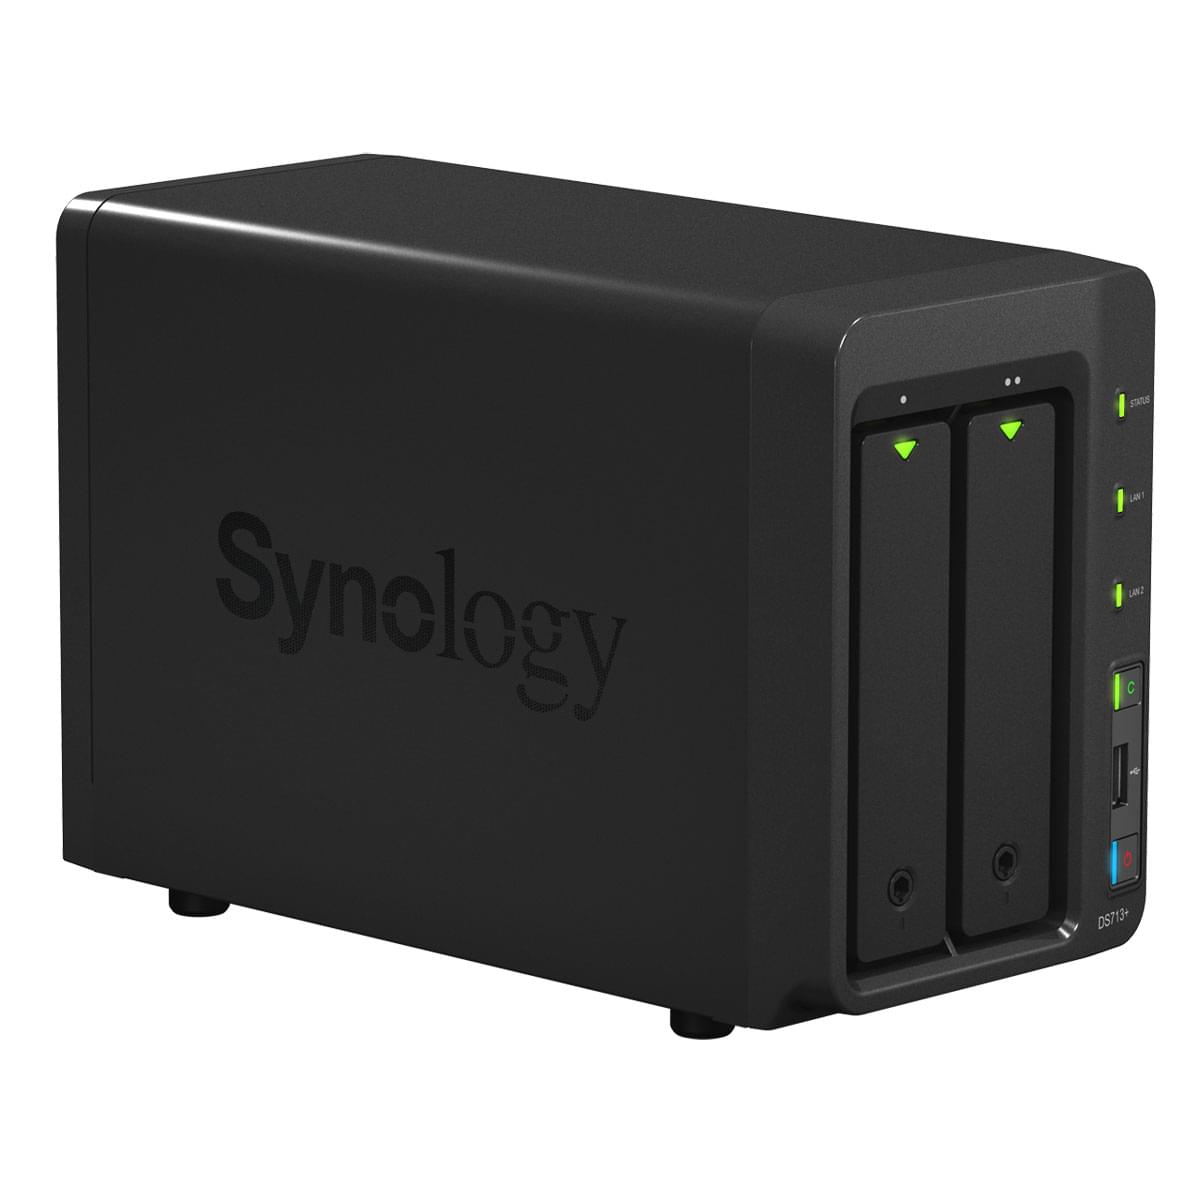 Serveur NAS Synology DS713+ - 2 HDD